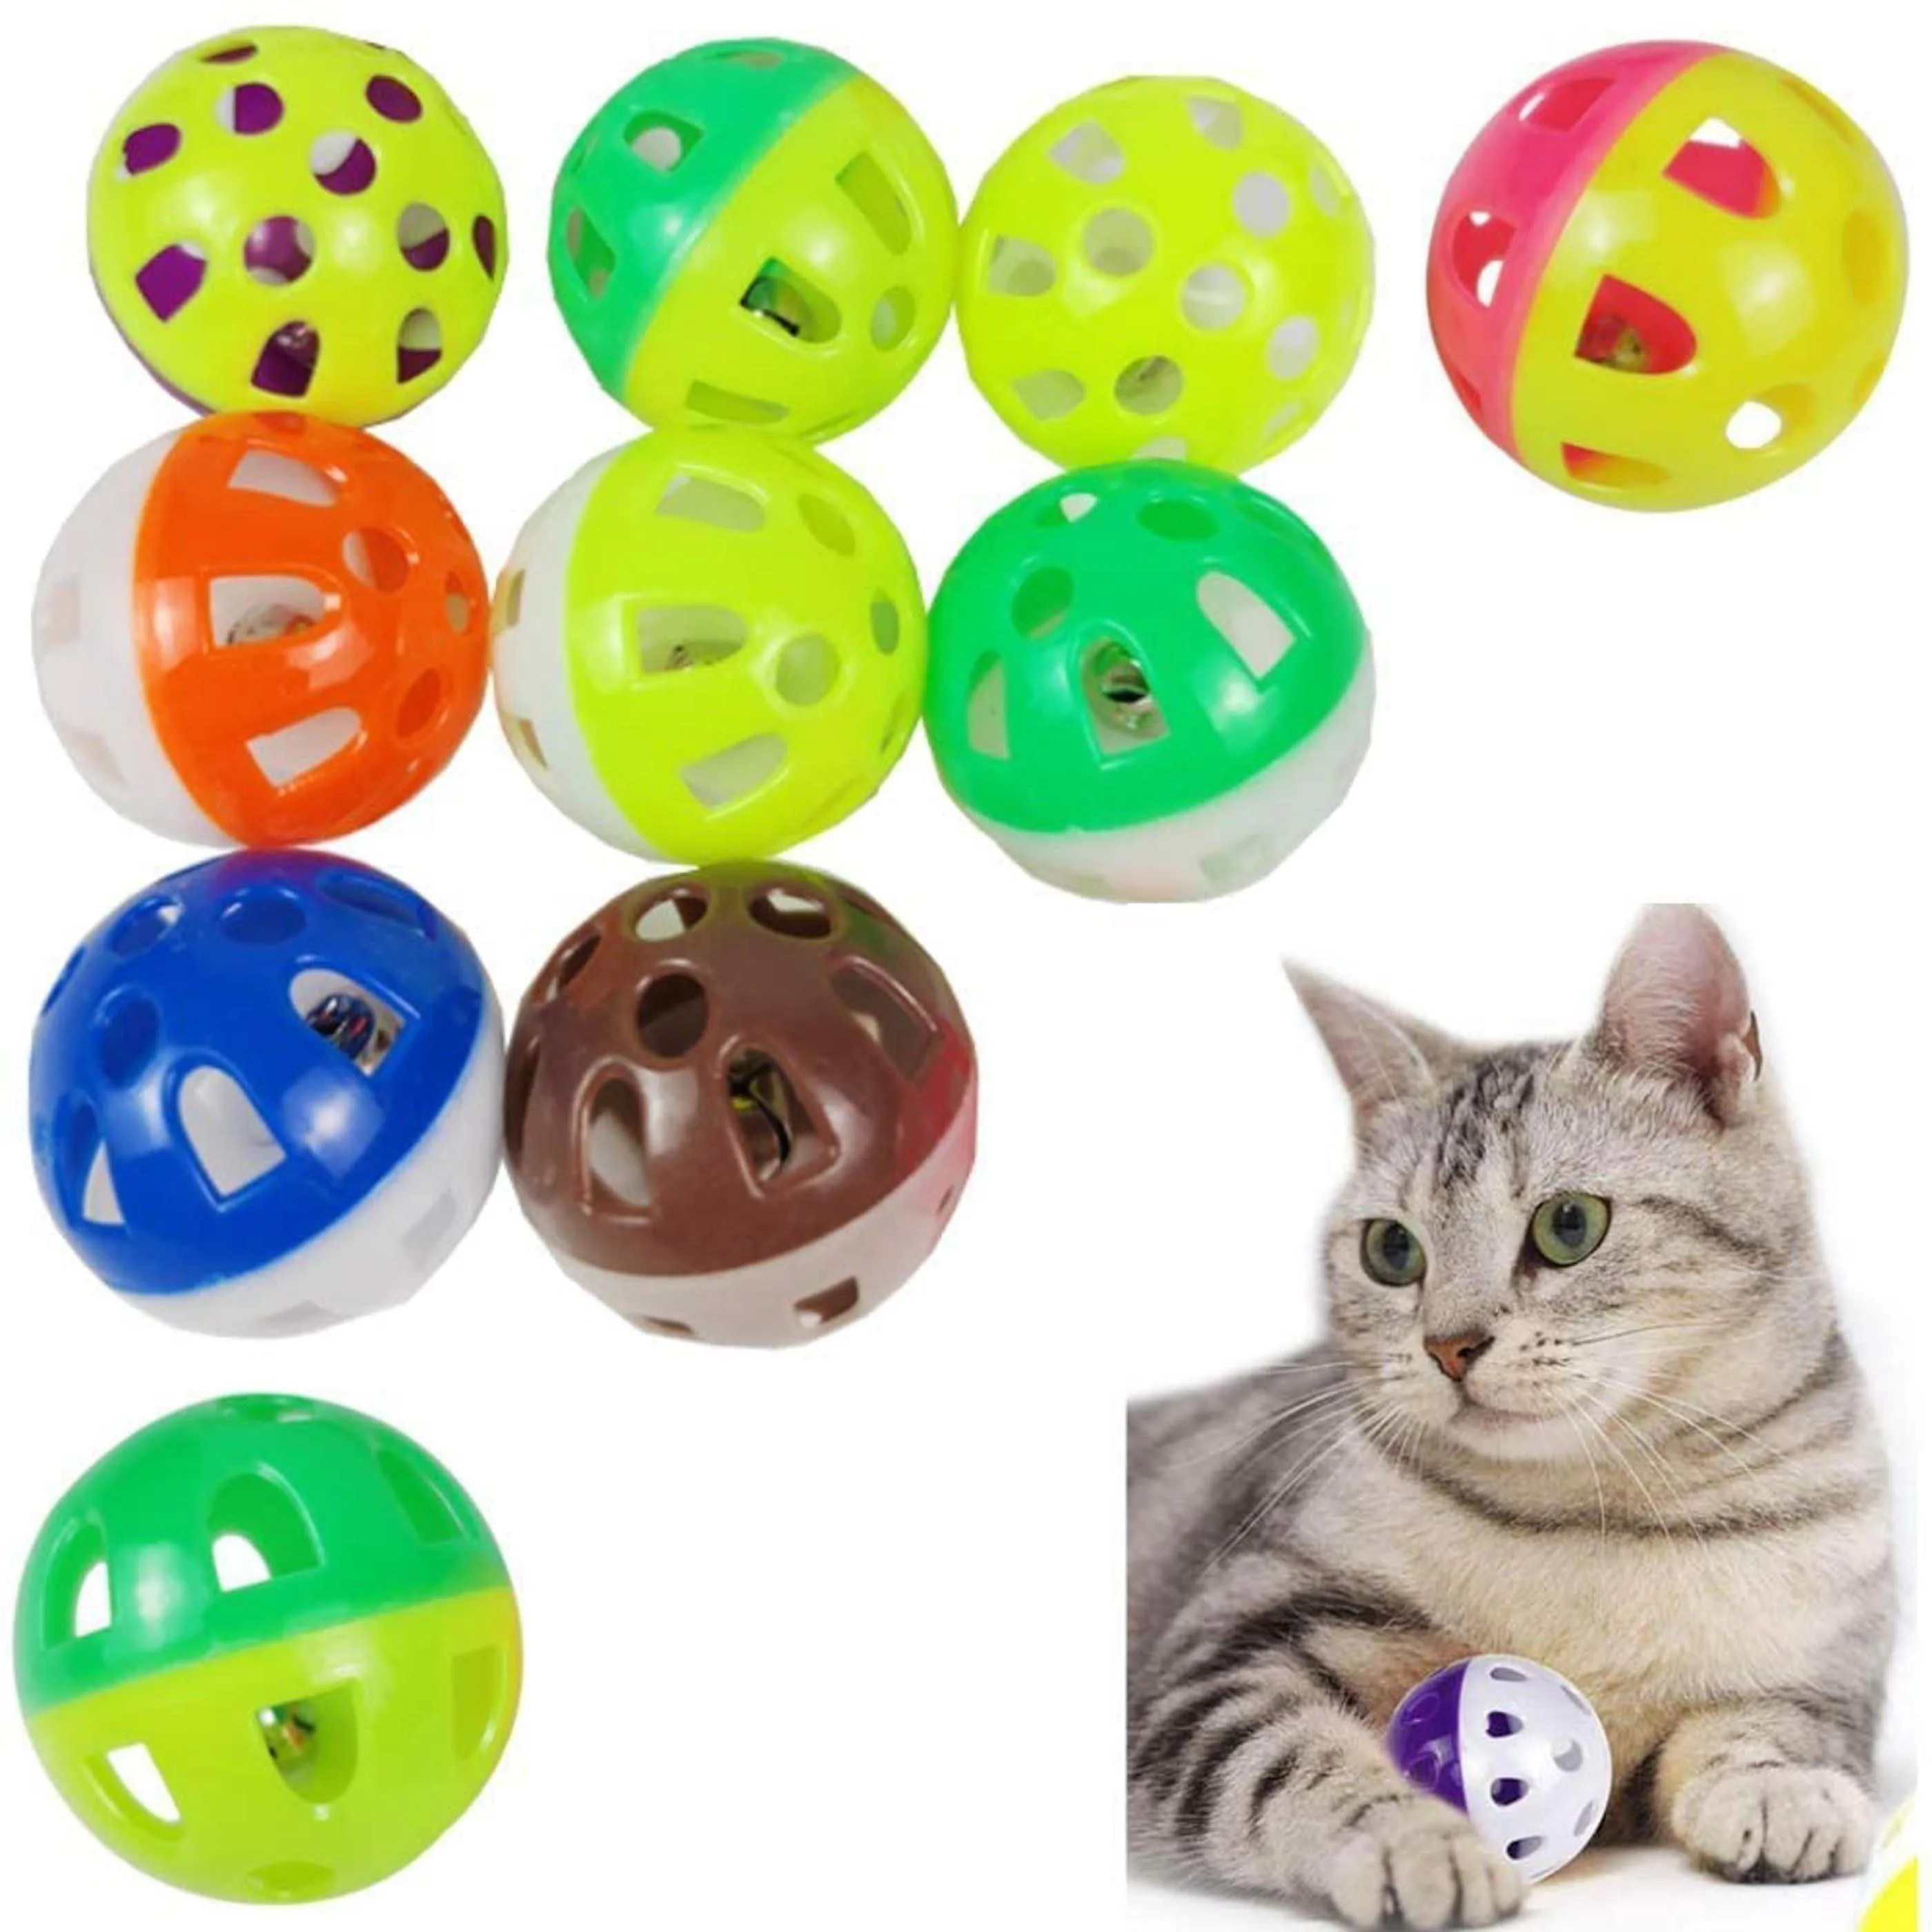 Color Random Delivery Gowind6 18Pcs Cat Toy Plastic Bell Hollow Ball Sound Game Game Kitten Interactive Rattle 